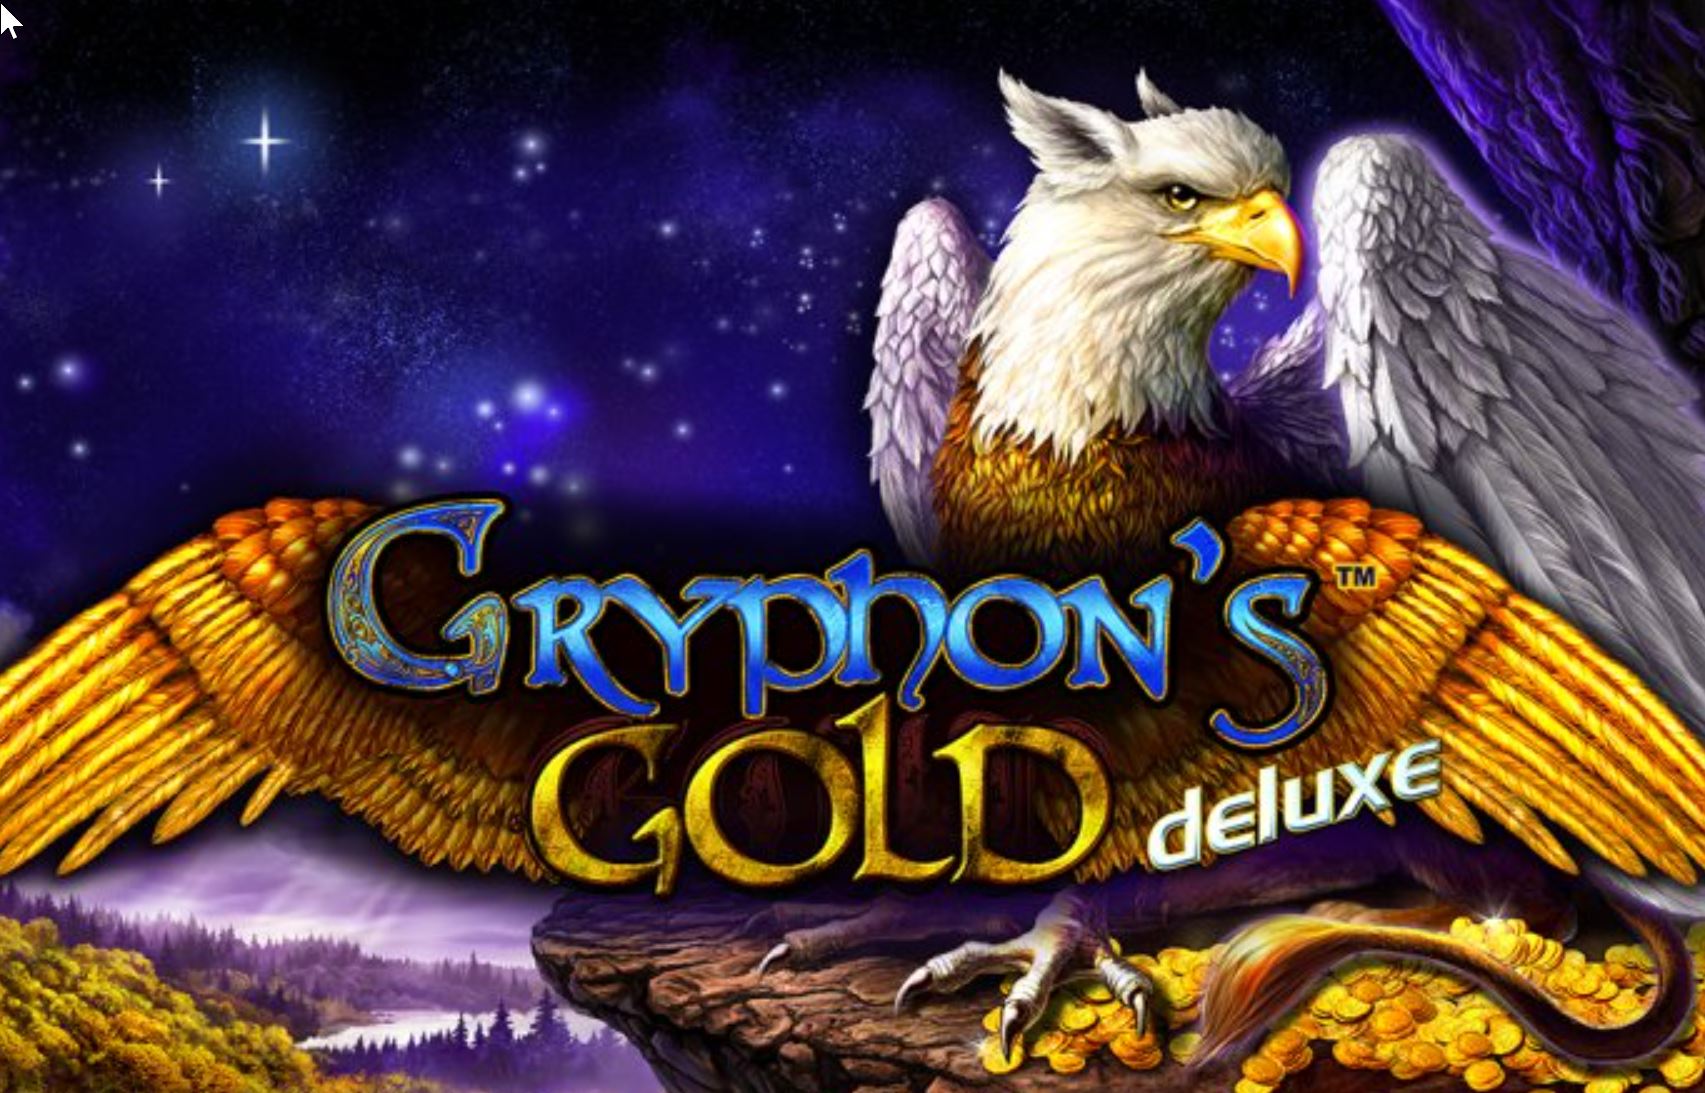 Gryphon’s Gold Deluxe Slot